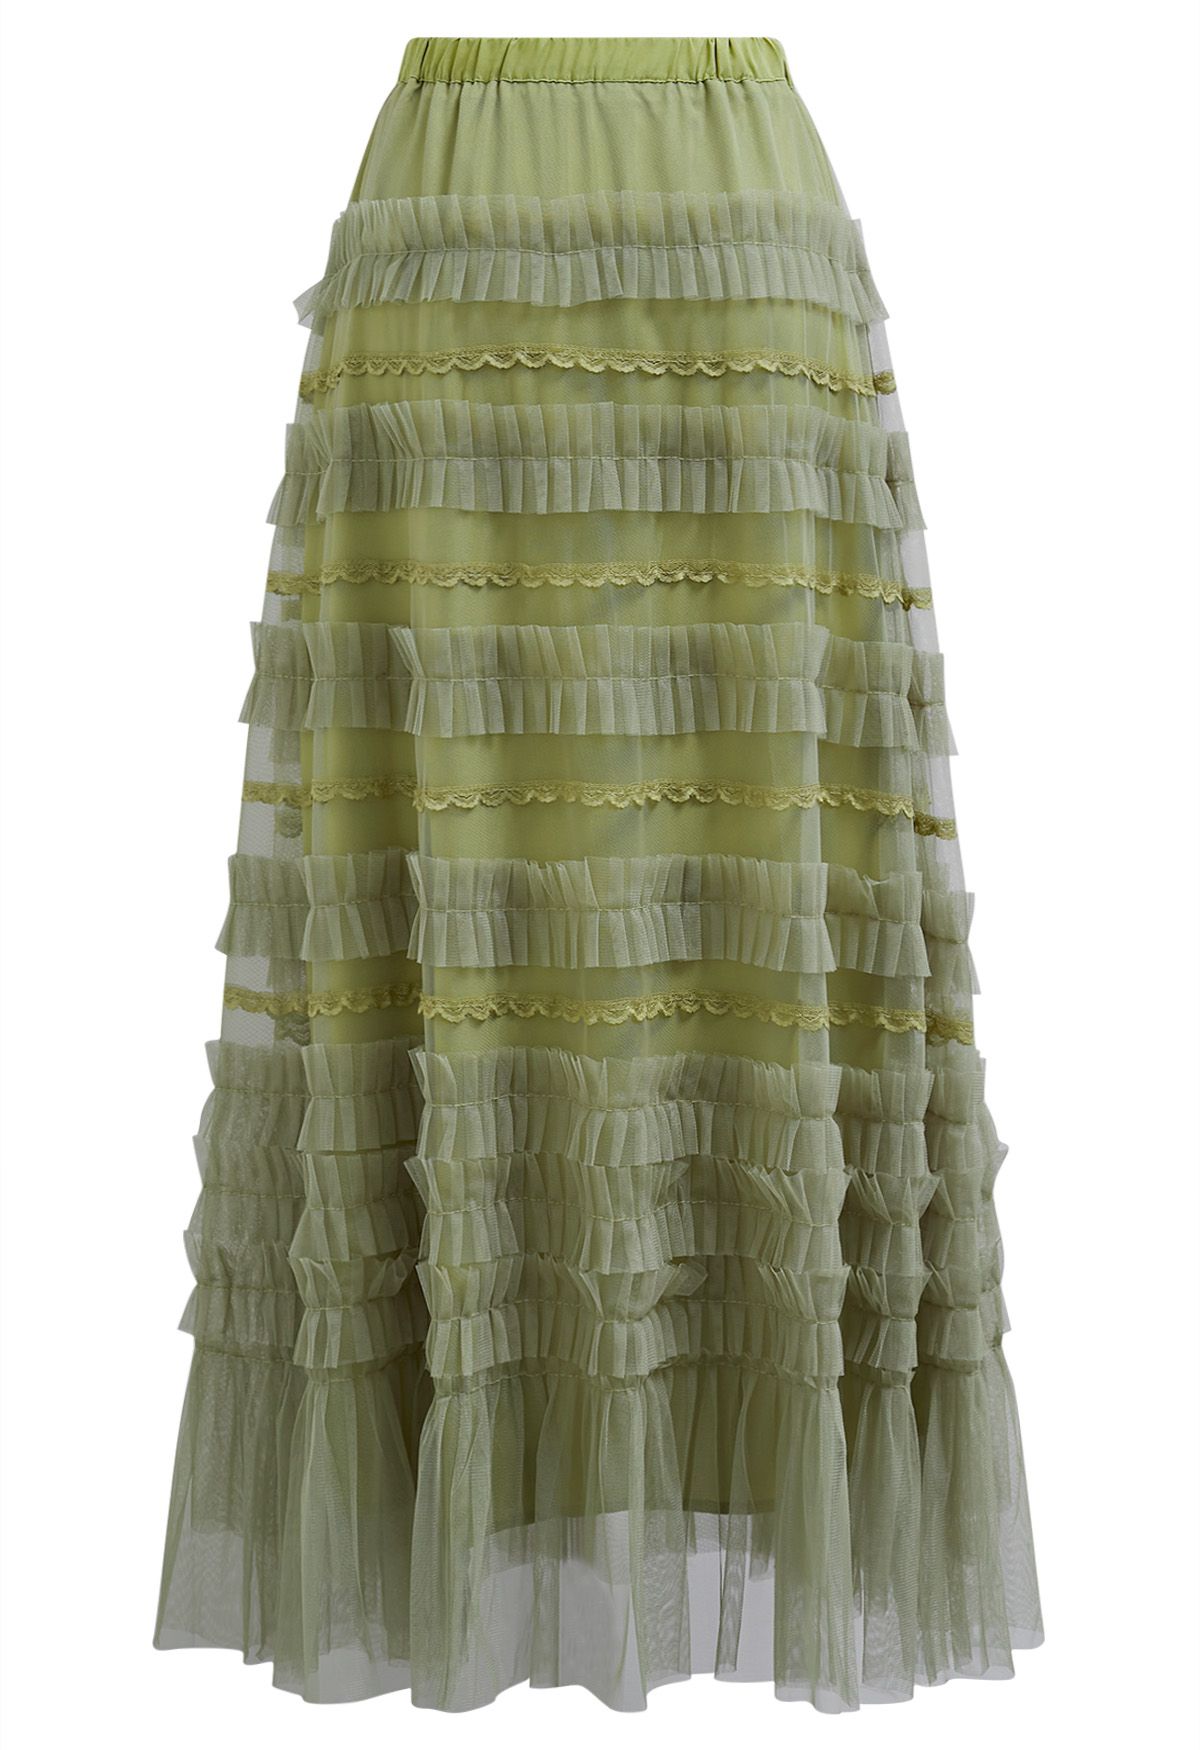 Ruffle Lace Mesh Tulle Maxi Skirt in Lime